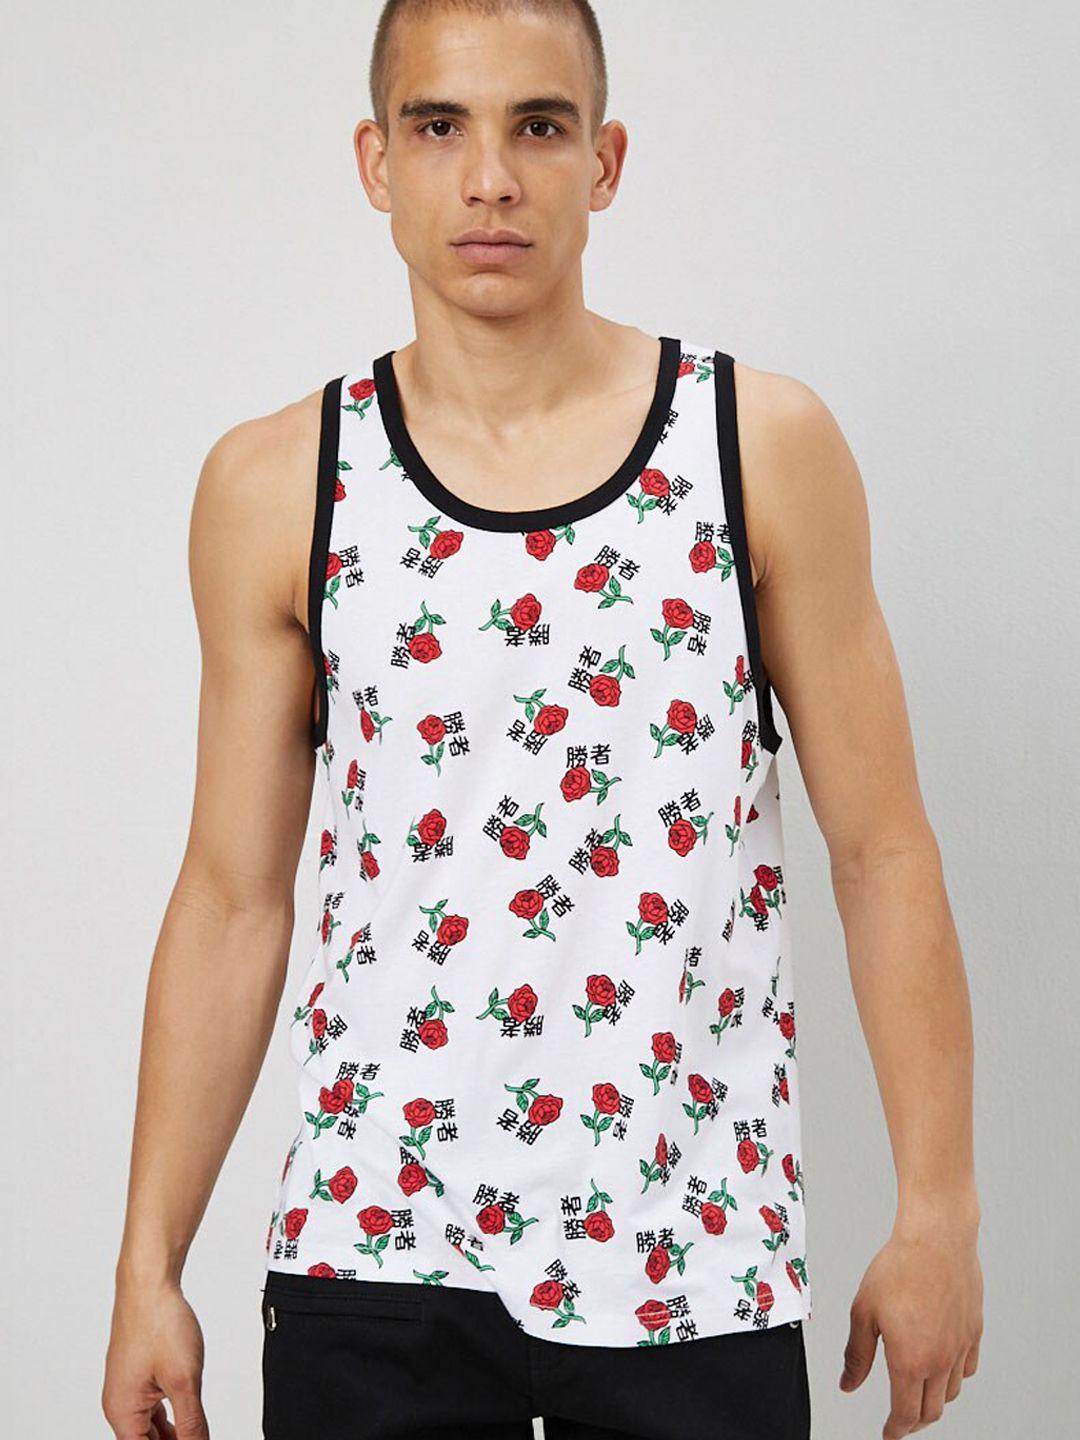 forever-21-men-white-&-red-floral-printed-tank-innerwear-vests-34786903